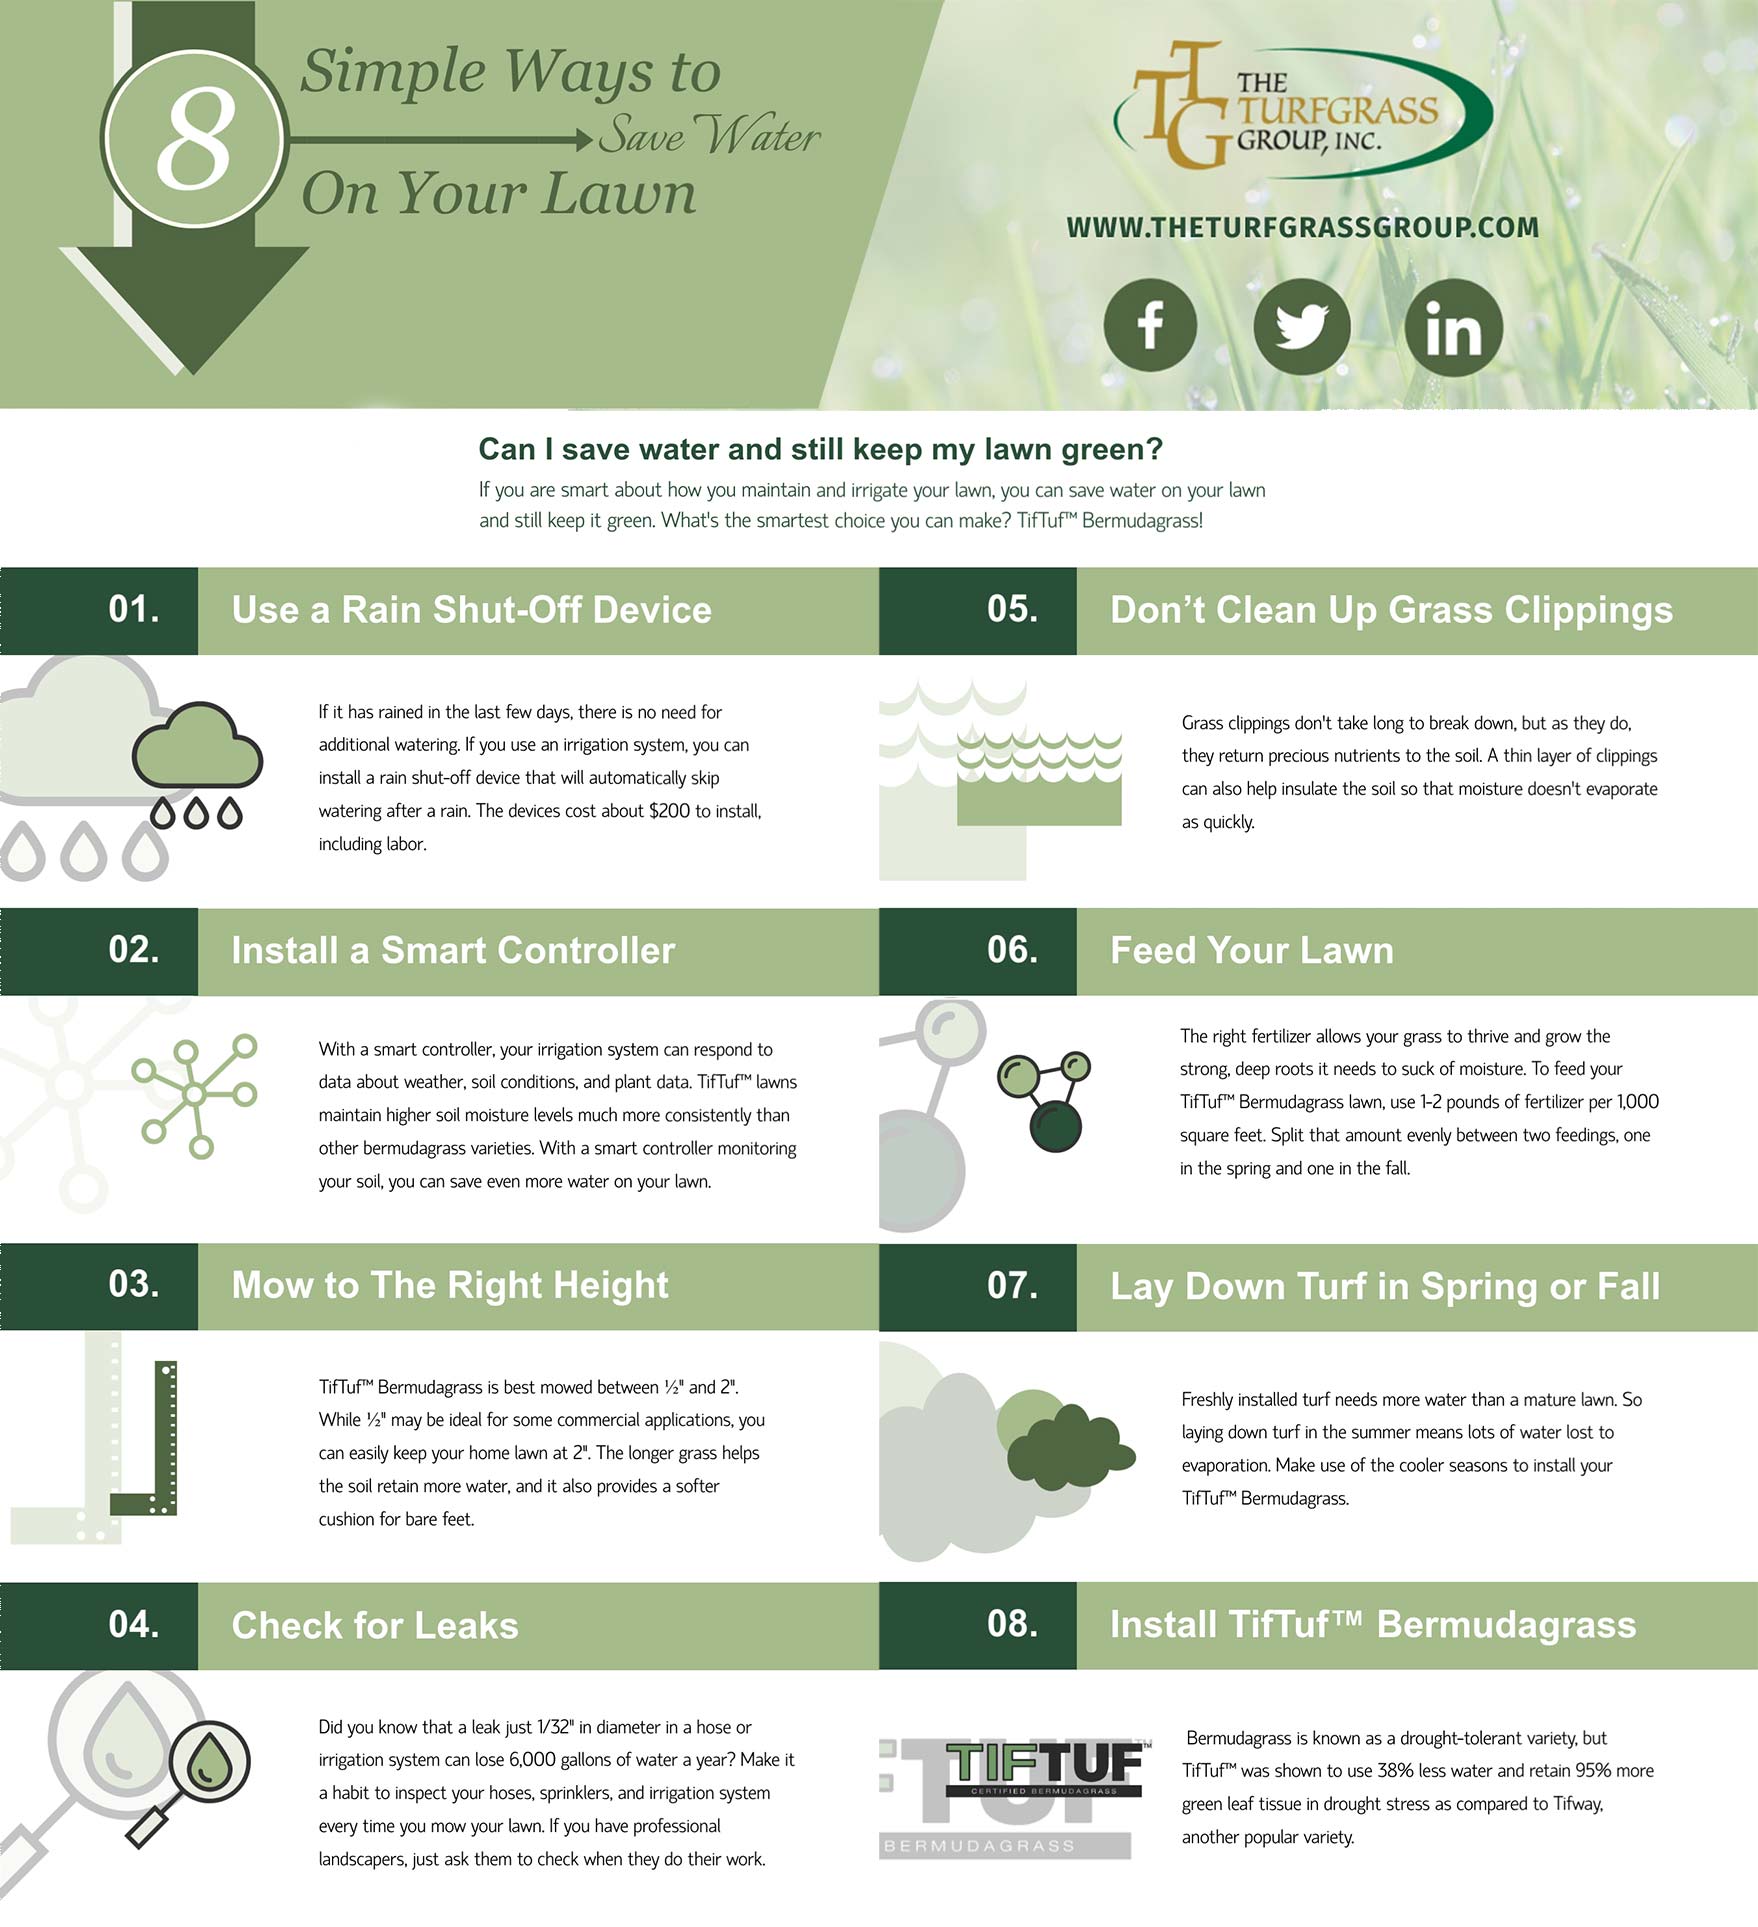 8 Simple Ways to Save Water on Your Lawn [infographic]